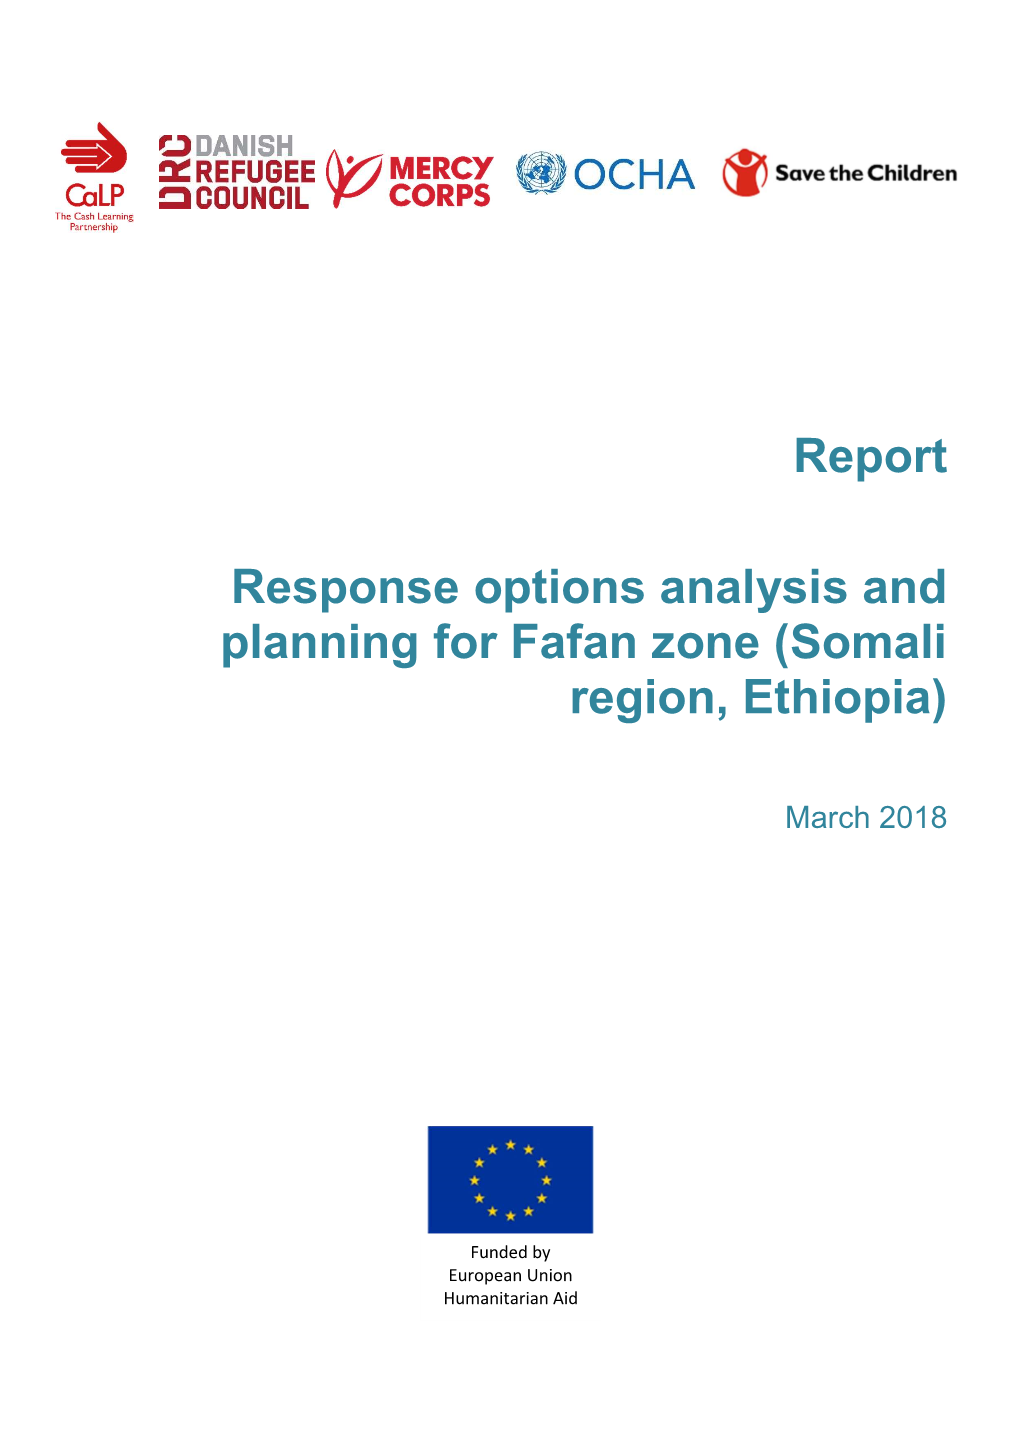 Report Response Options Analysis and Planning for Fafan Zone